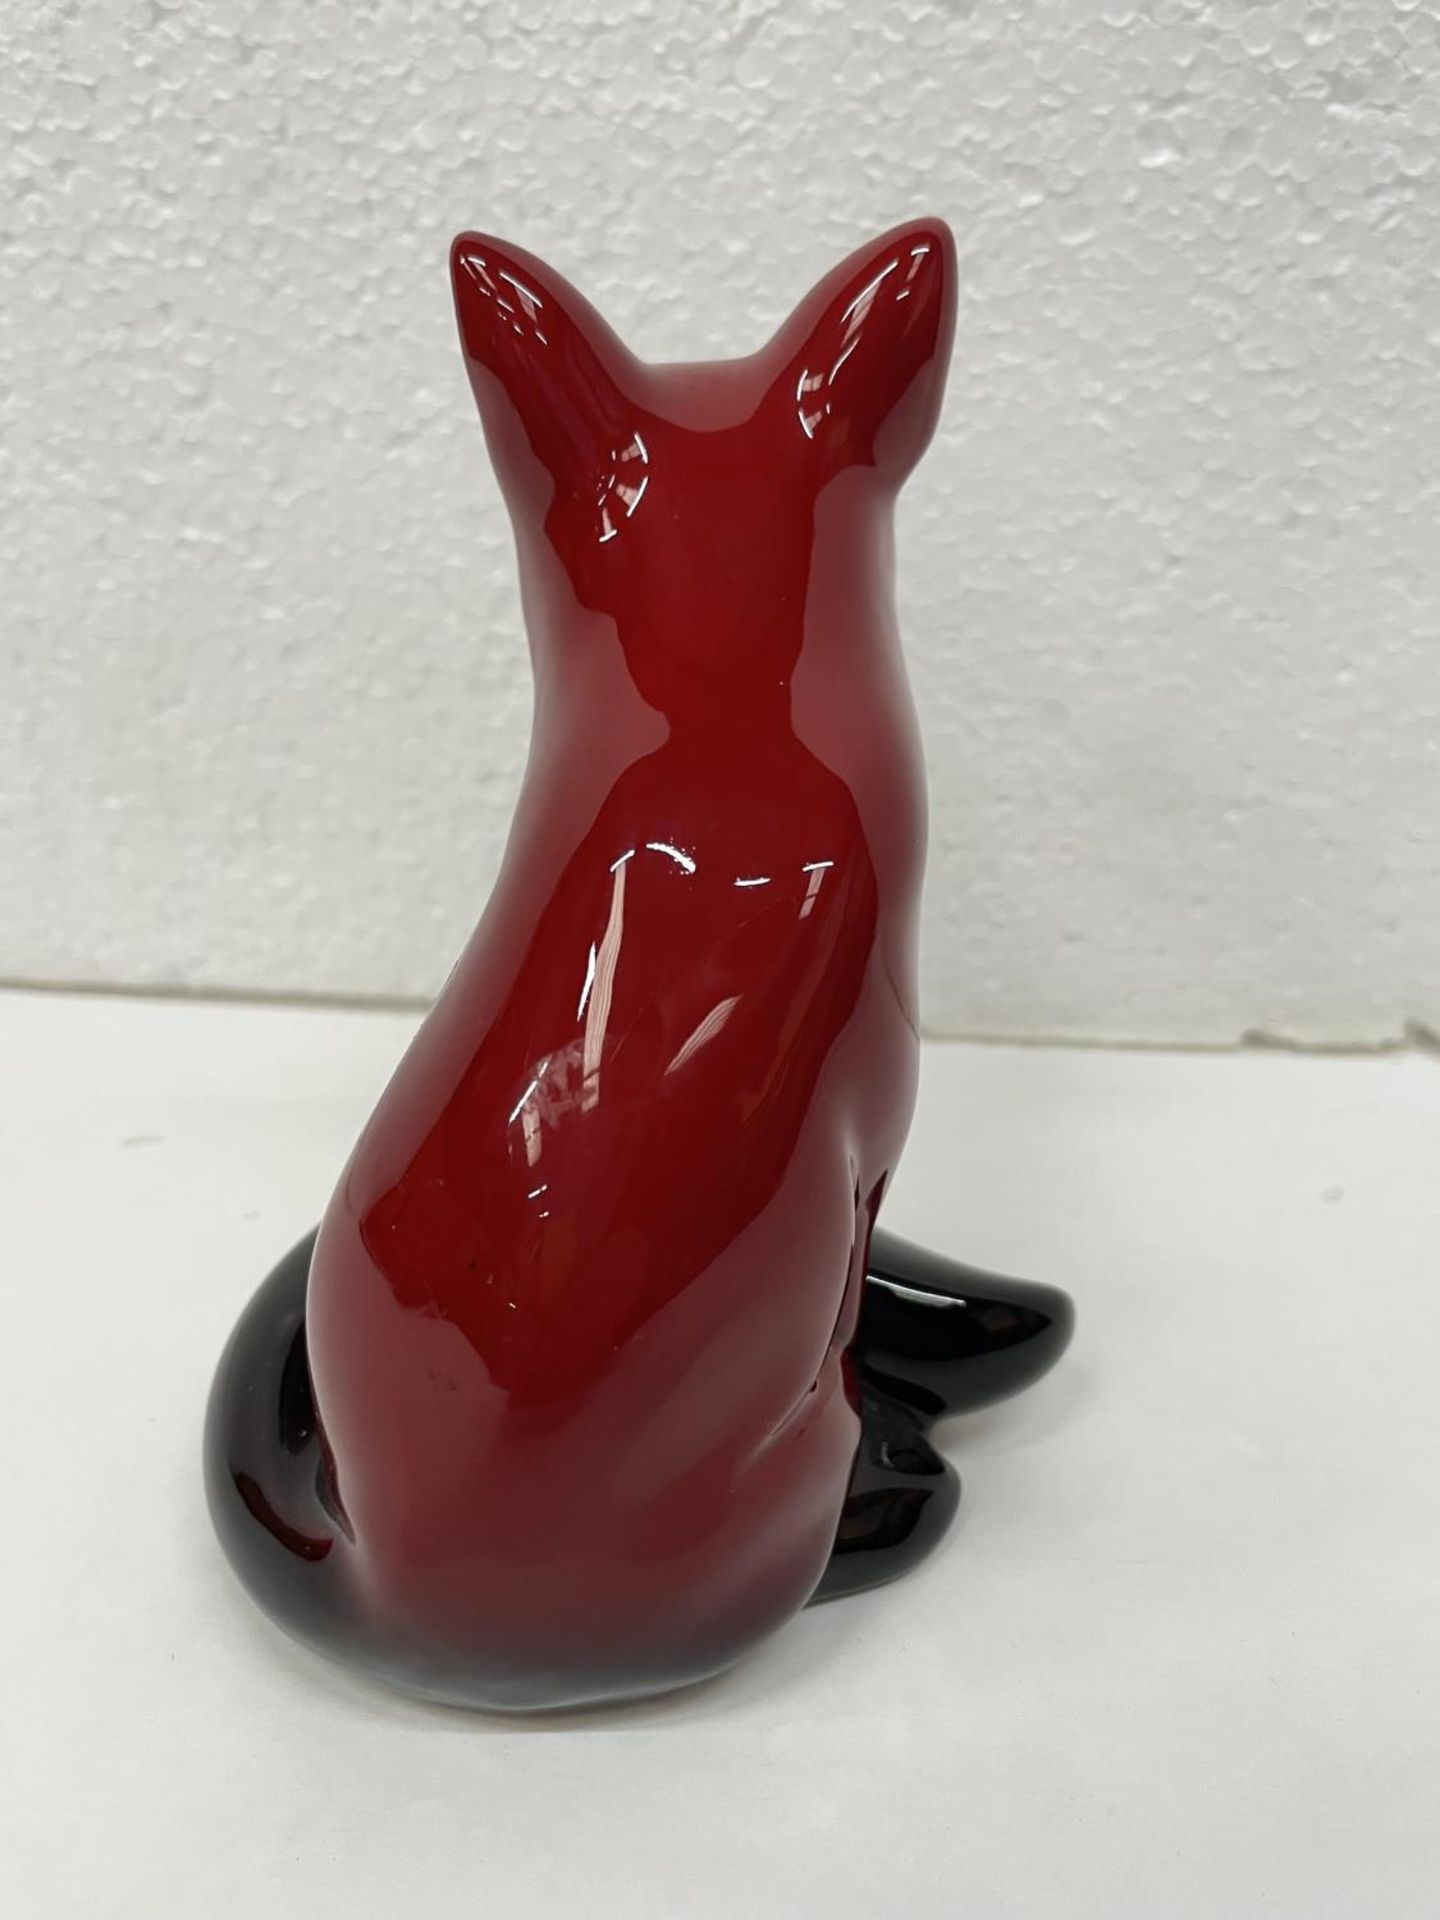 A DOULTON FLAMBE SITTING FOX - Image 3 of 5